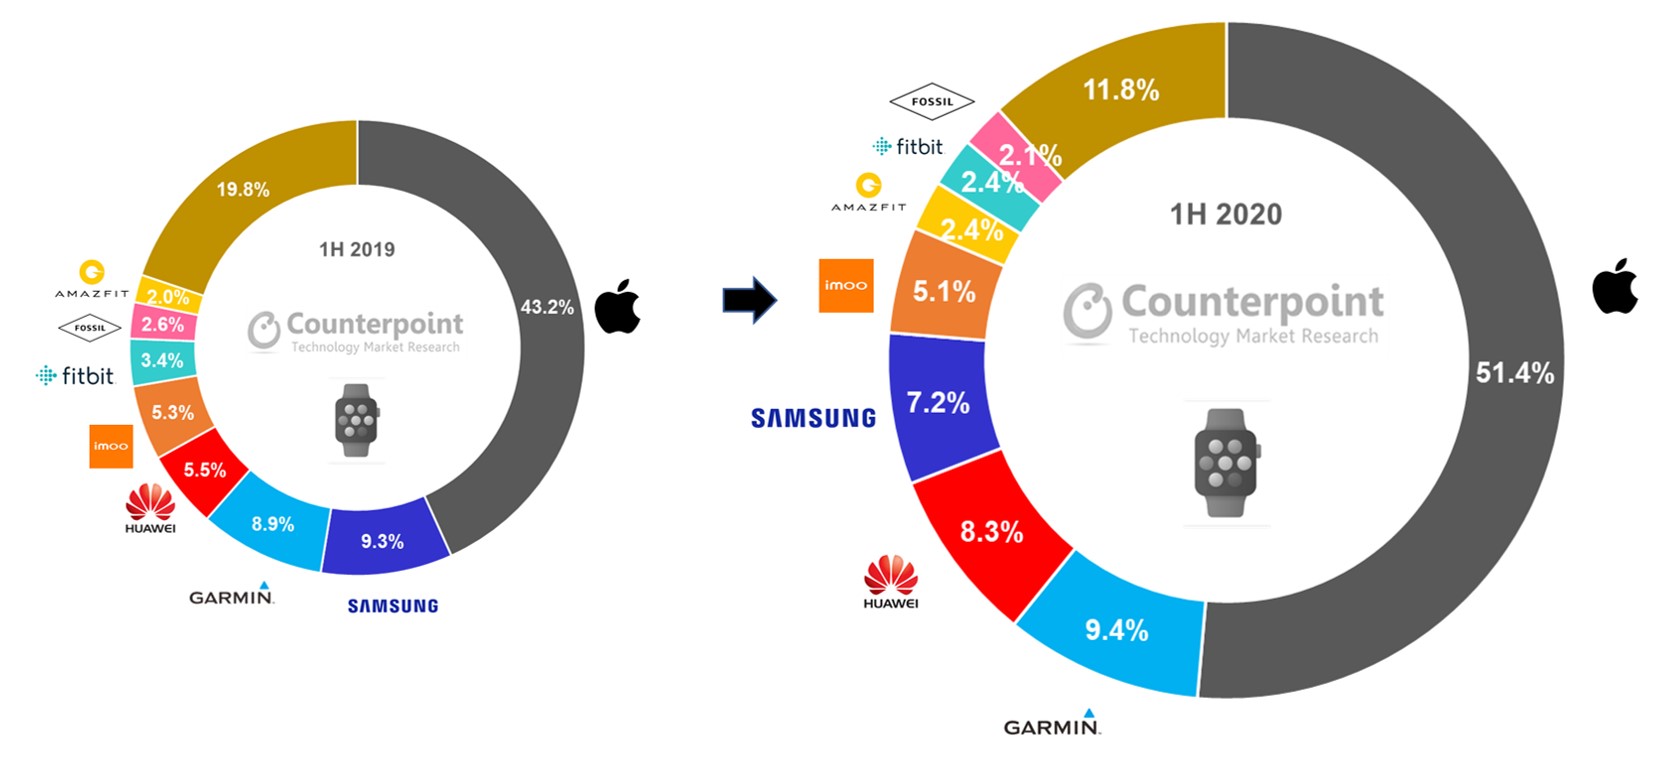 Counterpoint Research Global Smartwatch Shipment Revenue Share % in H1 2020 vs H1 2019